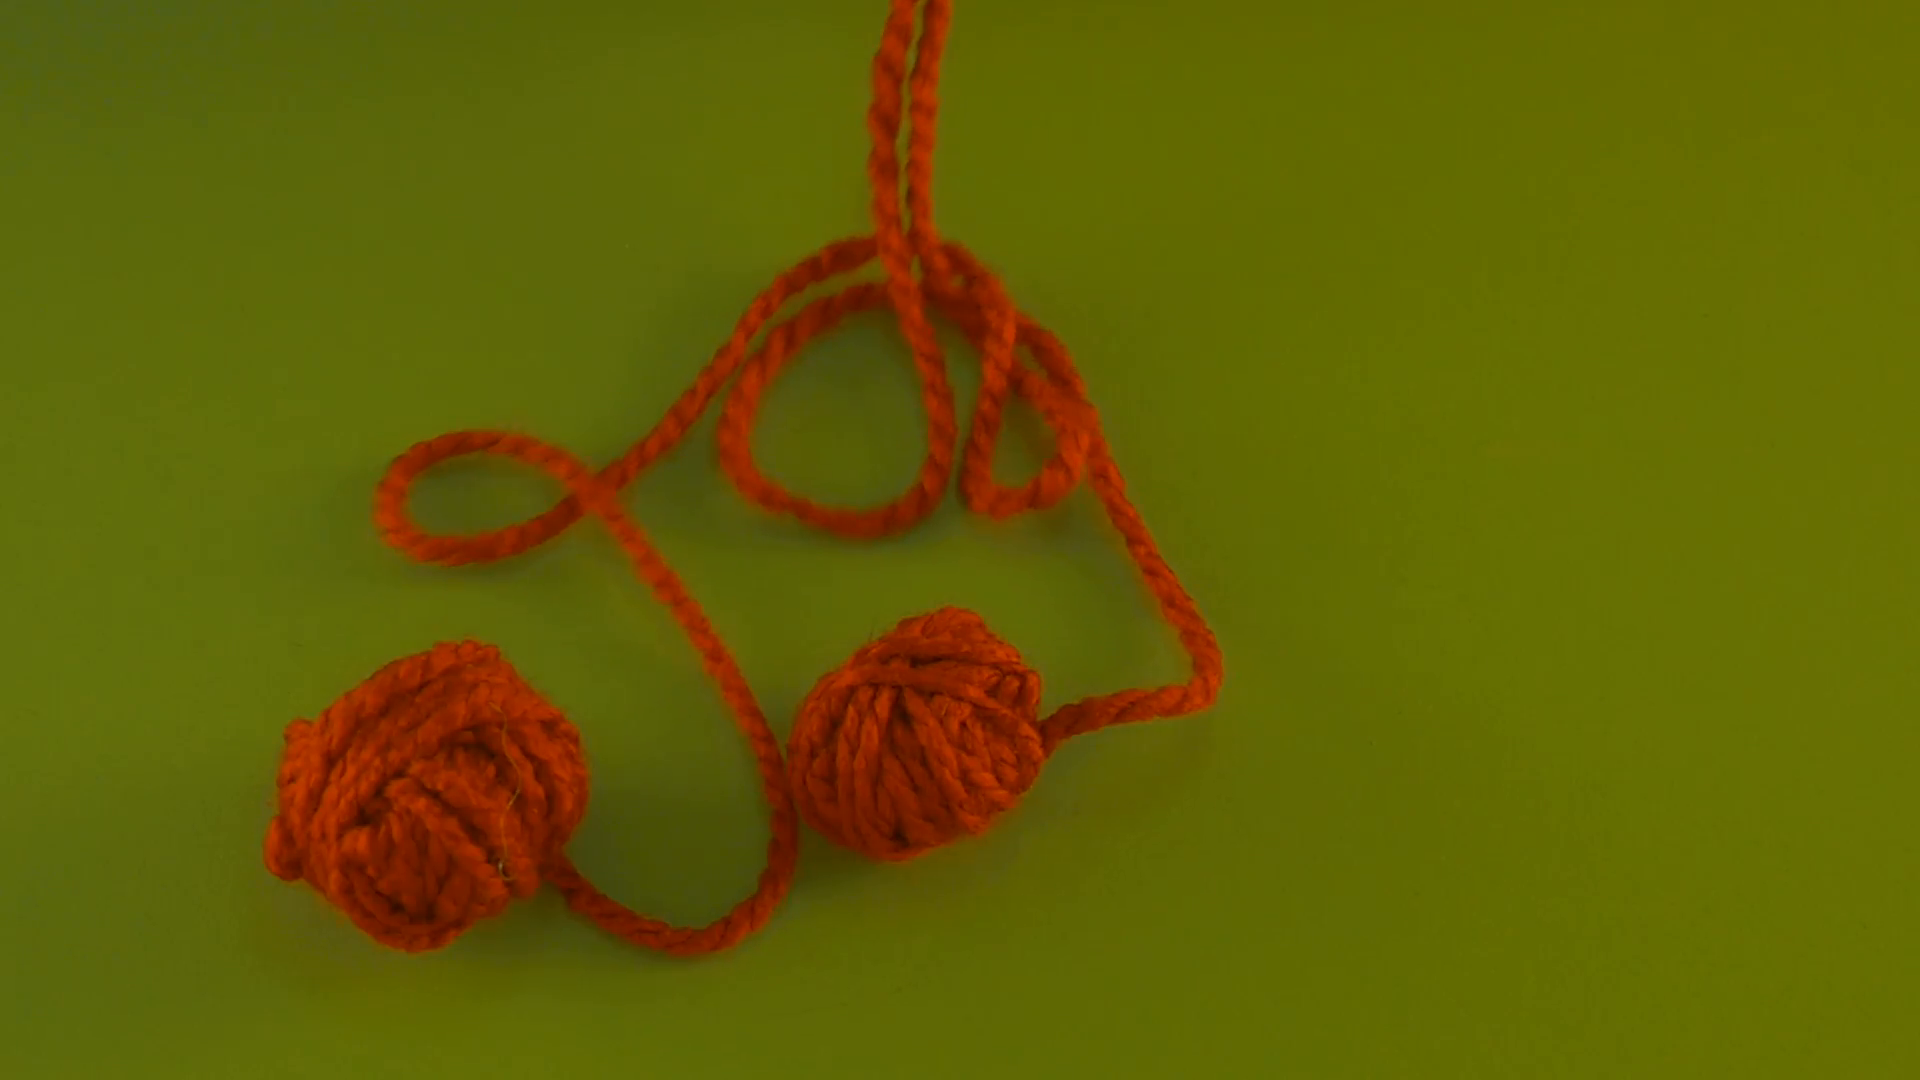 Two Red Yarn Balls Are Unraveling on Green Screen Colorful Tangle of ...